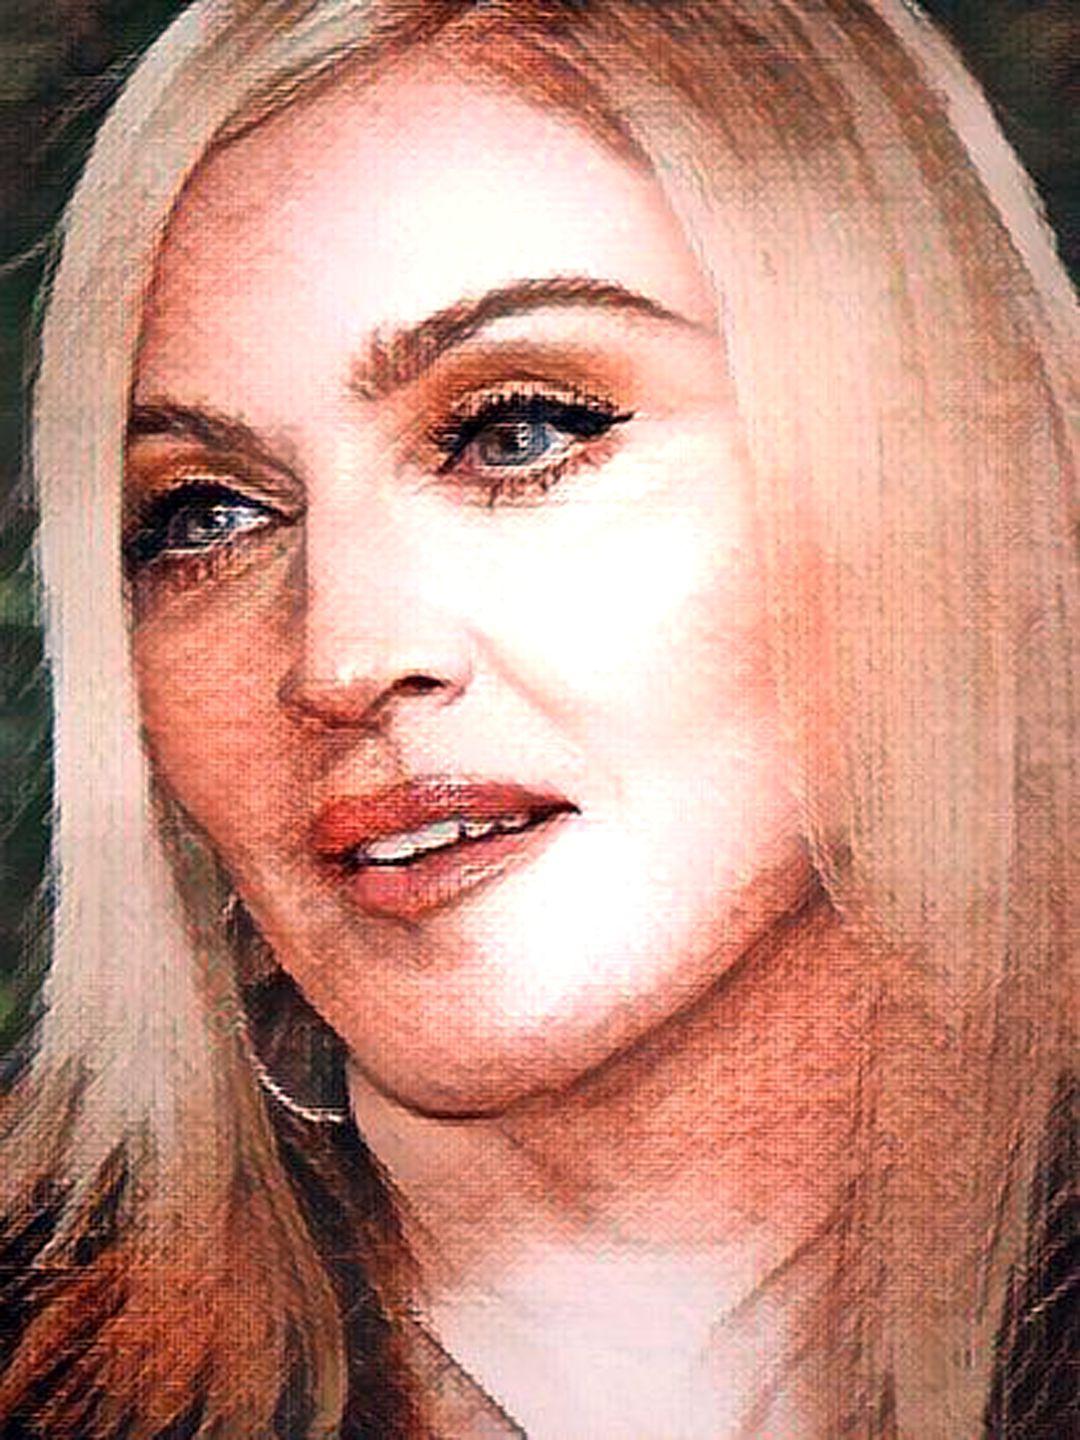 Sane Libyan Sixe Video Hq - Madonna # 36 - Celeb ART - Beautiful Artworks of Celebrities, Footballers,  Politicians and Famous People in World | OpenSea